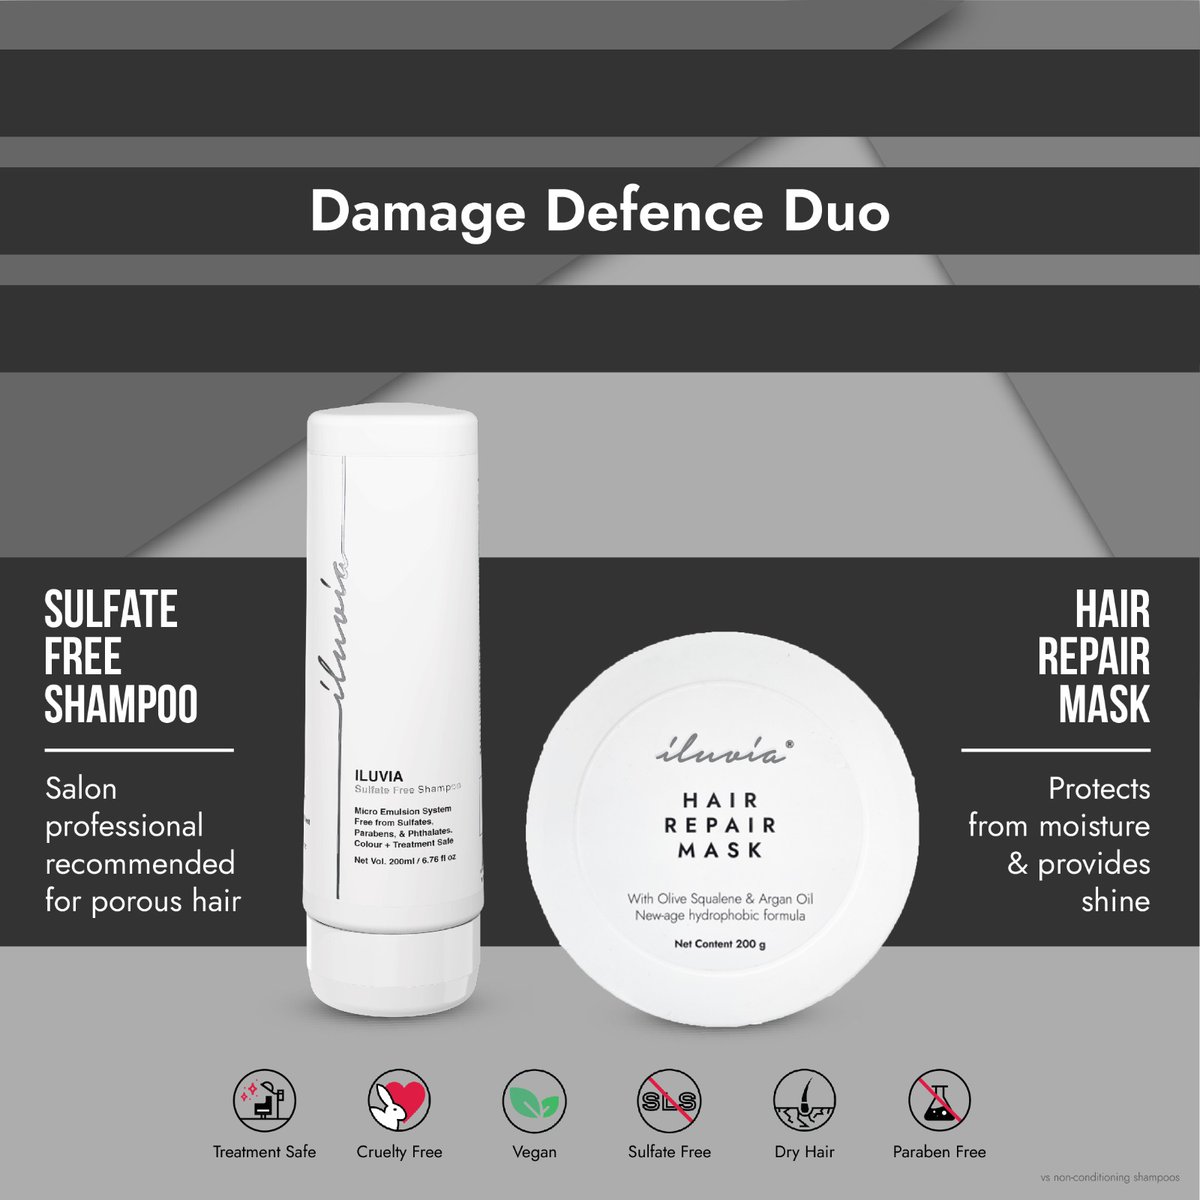 Dry or damaged hair? Say goodbye to frizz, breakage, and unmanageable tresses. Our specialised Sulfate-Free Shampoo and Hydrophobic Hair Repair Mask work together to bring your hair back to life.

Restore and Revive with iluvia's Damage Defence Duo! 

 #iluvia #iluviapro